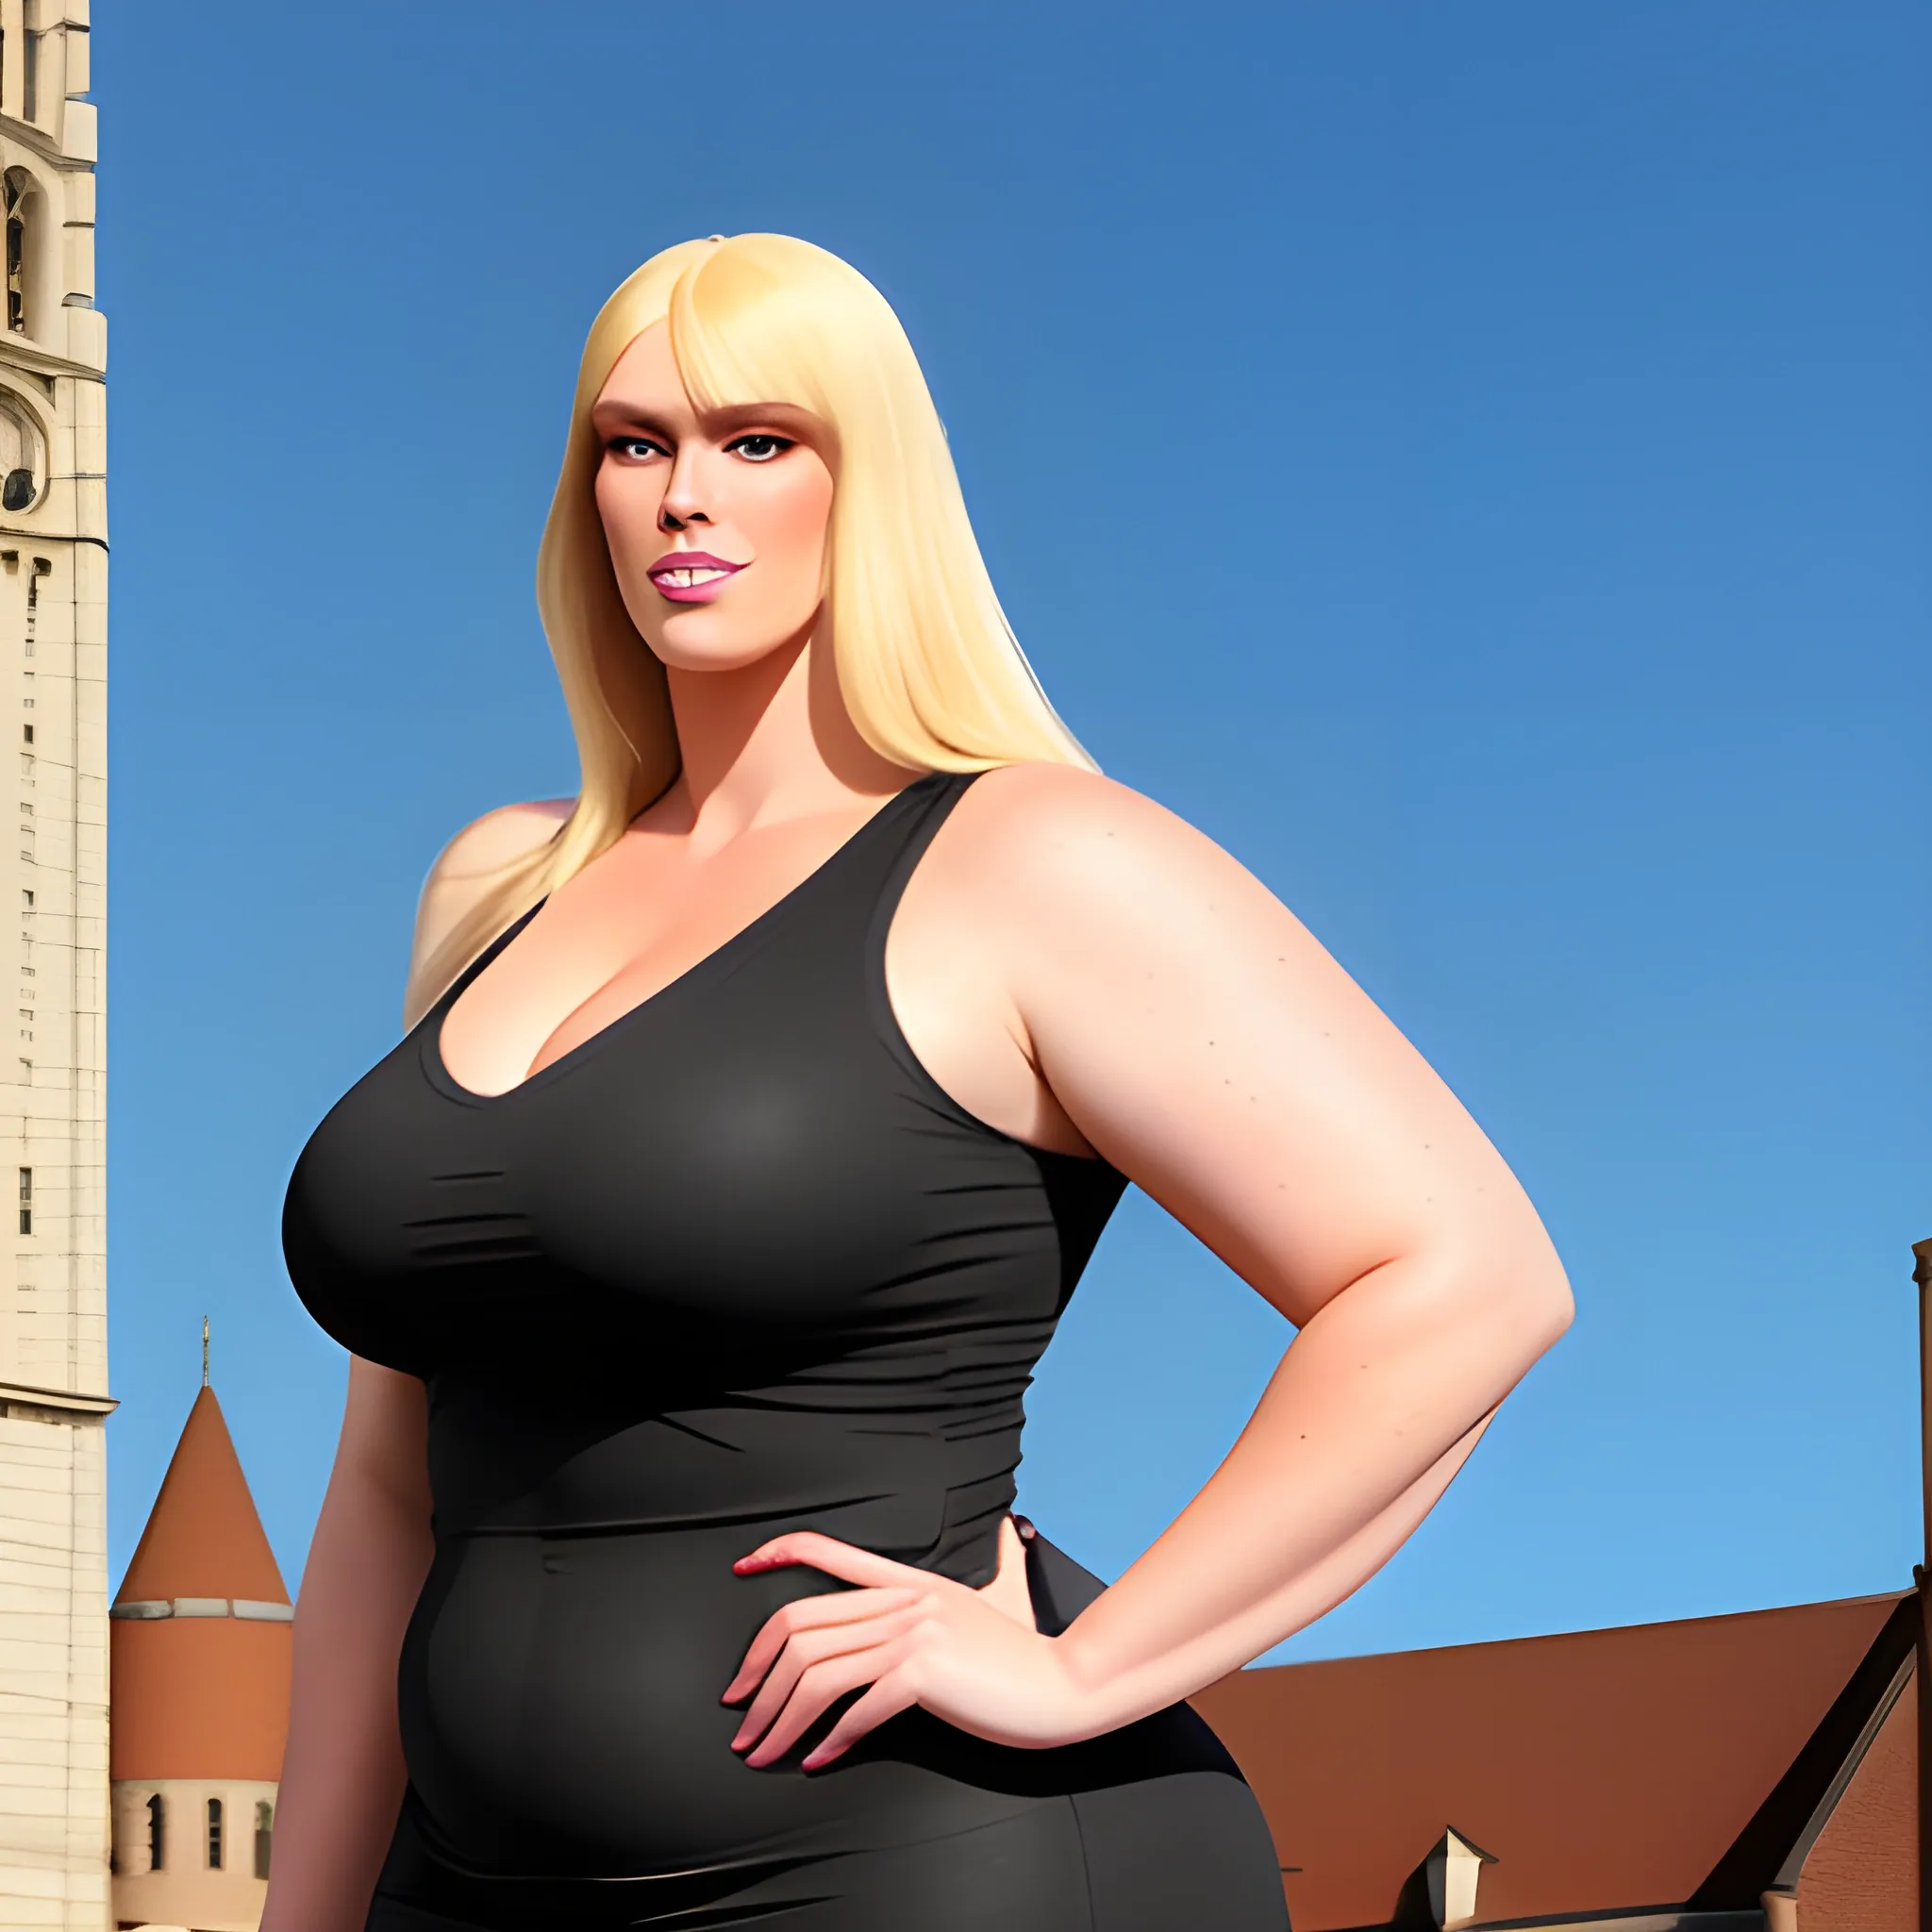 huge and very tall friendly blonde plus size girl with small head and broad shoulders, not curvy but massive, on busy schoolyard towerring among other students and teachers